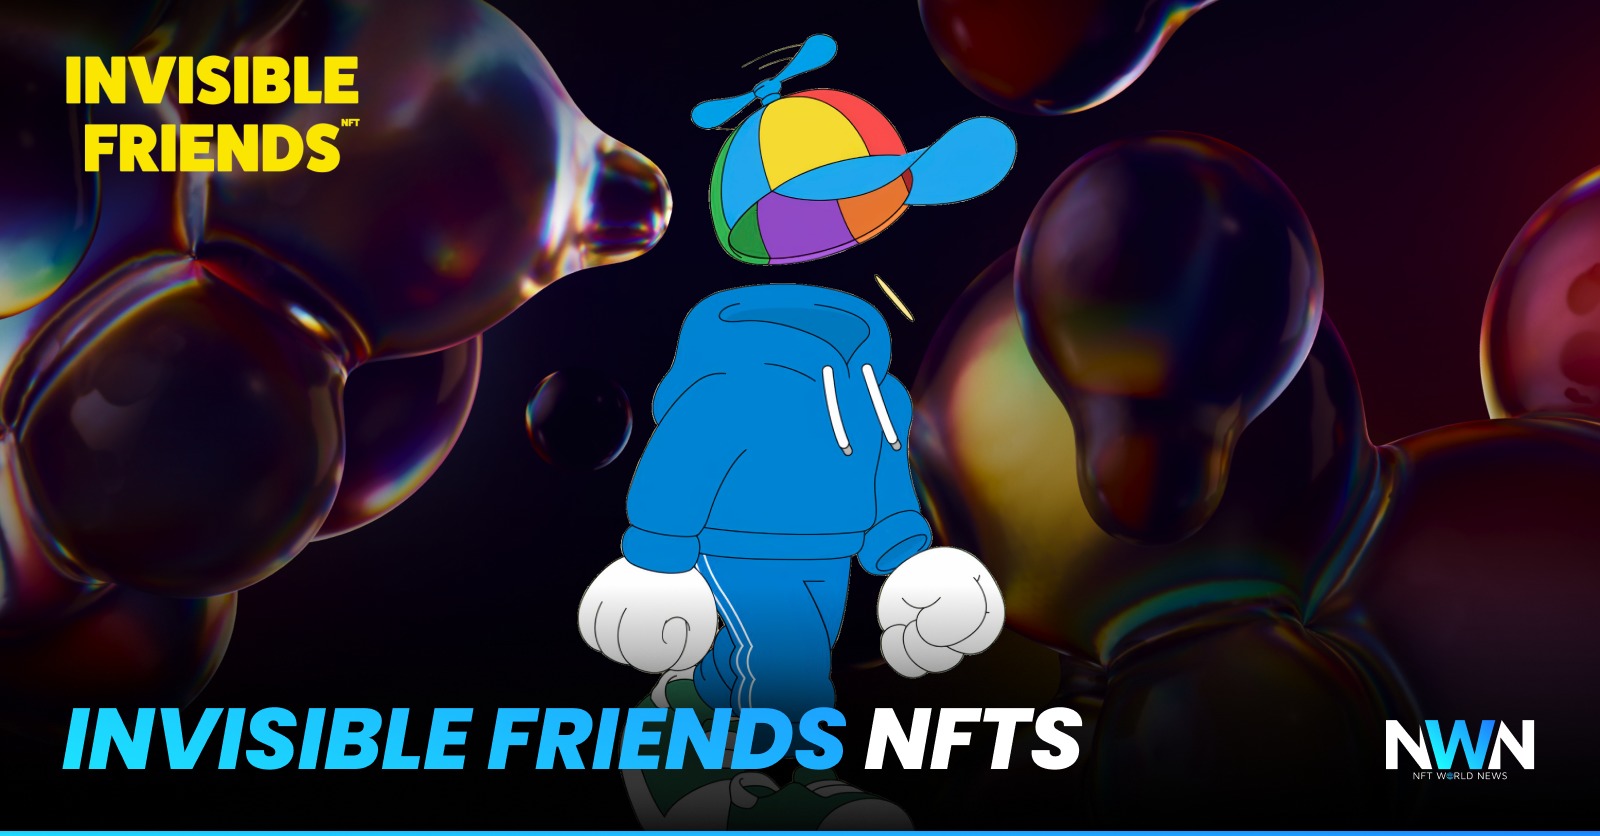 3D Invisible Friends And The Major Concern For Every NFT Enthusiast